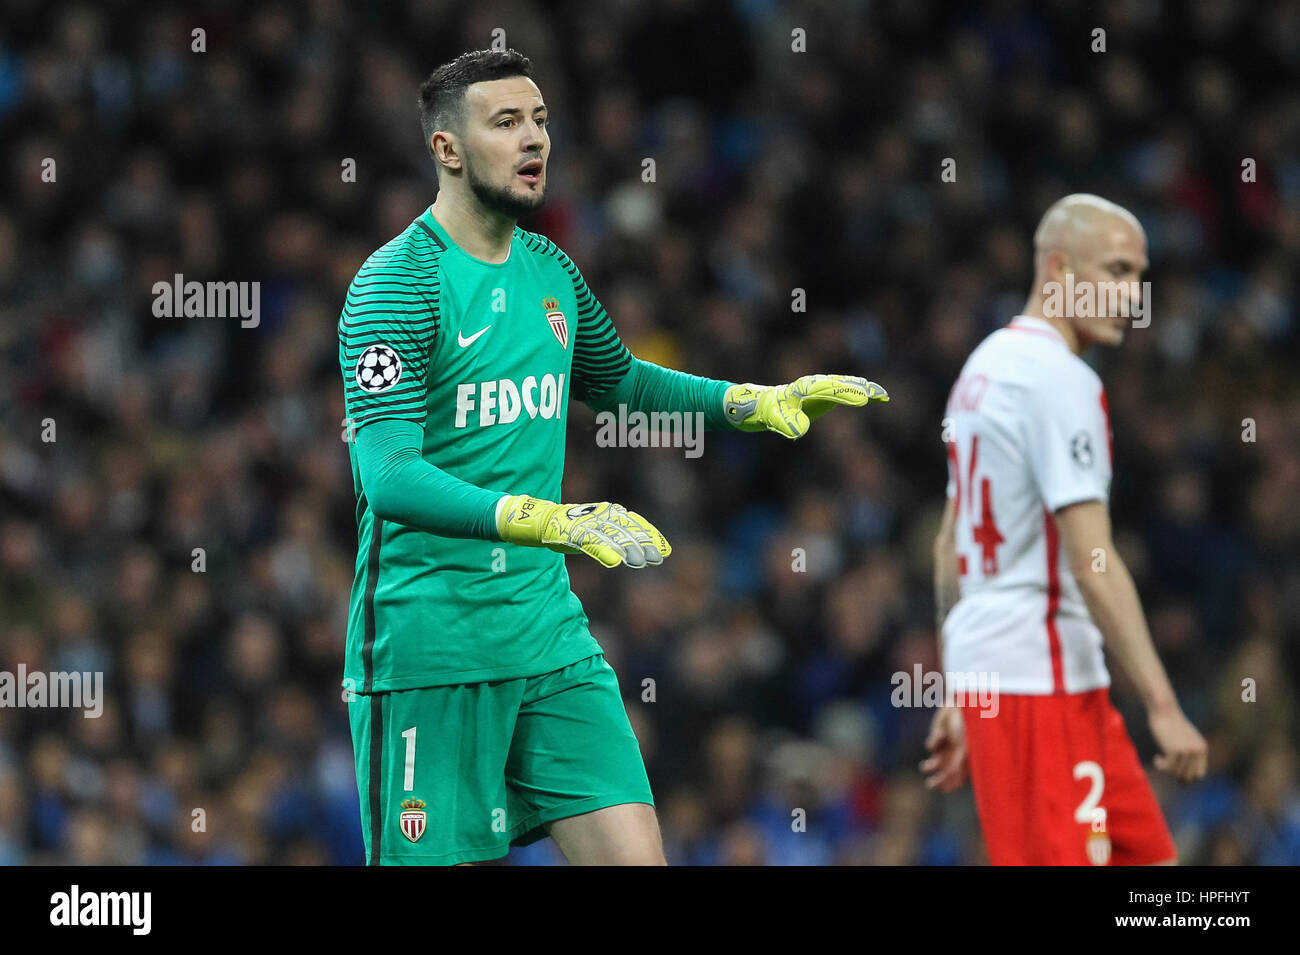 Manchester, UK. 21st Feb, 2017. Danijel Subasic of Monaco gestures during the UEFA Champions League Round of 16 first leg match between Manchester City and AS Monaco at the Etihad Stadium on February 21st 2017 in Manchester, England. Credit: PHC Images/Alamy Live News Stock Photo